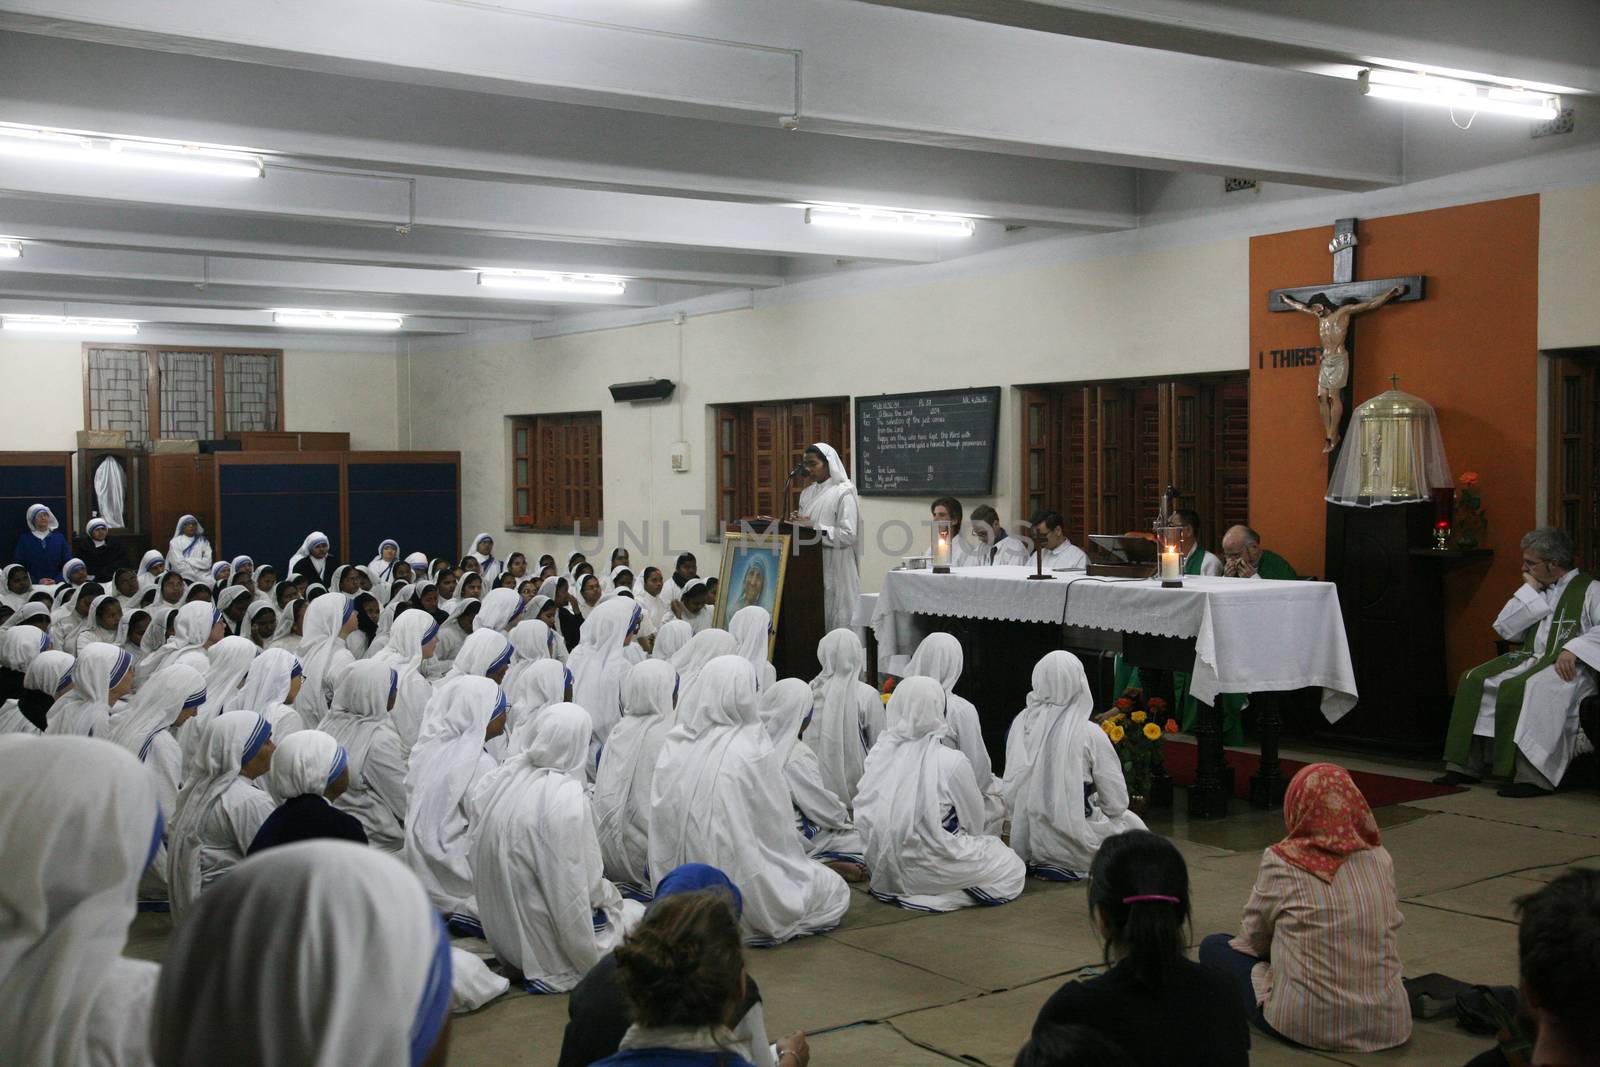 Sisters of The Missionaries of Charity of Mother Teresa at Mass in the chapel of the Mother House, Kolkata by atlas